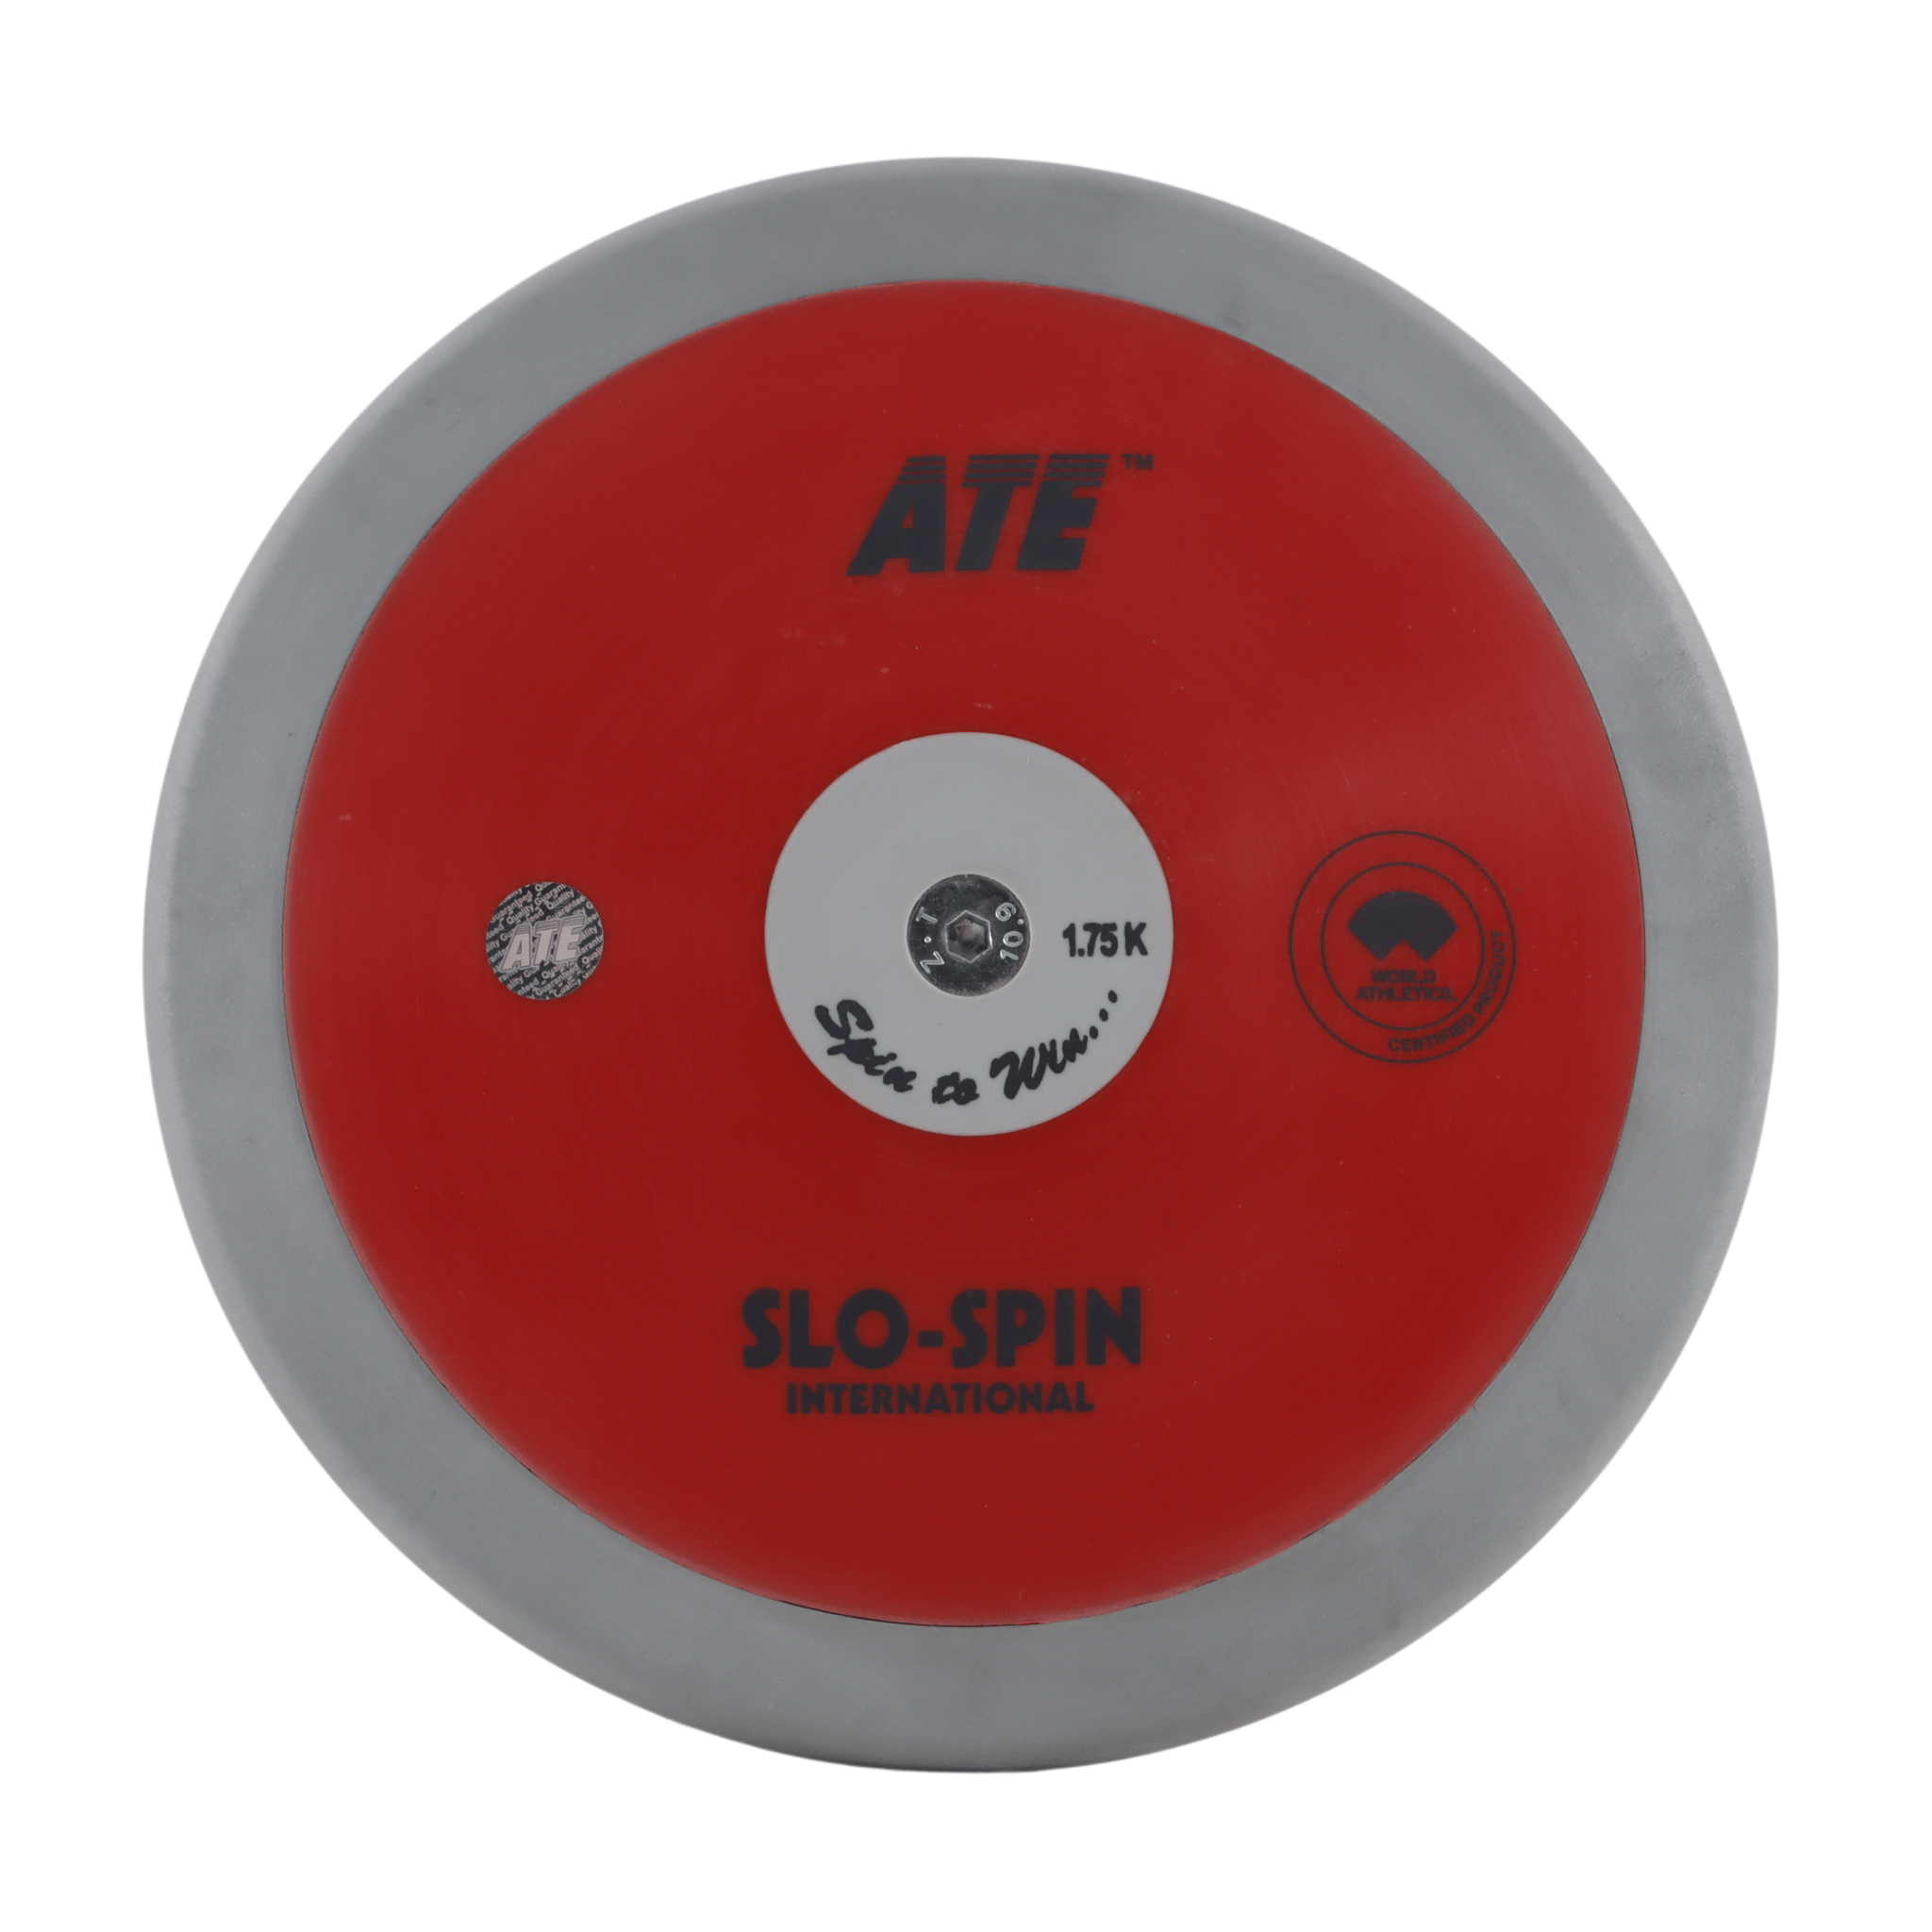 ATE Slo Spin International Discus | Red Plates with light Grey centre and Terragrip rim | 1.75kg